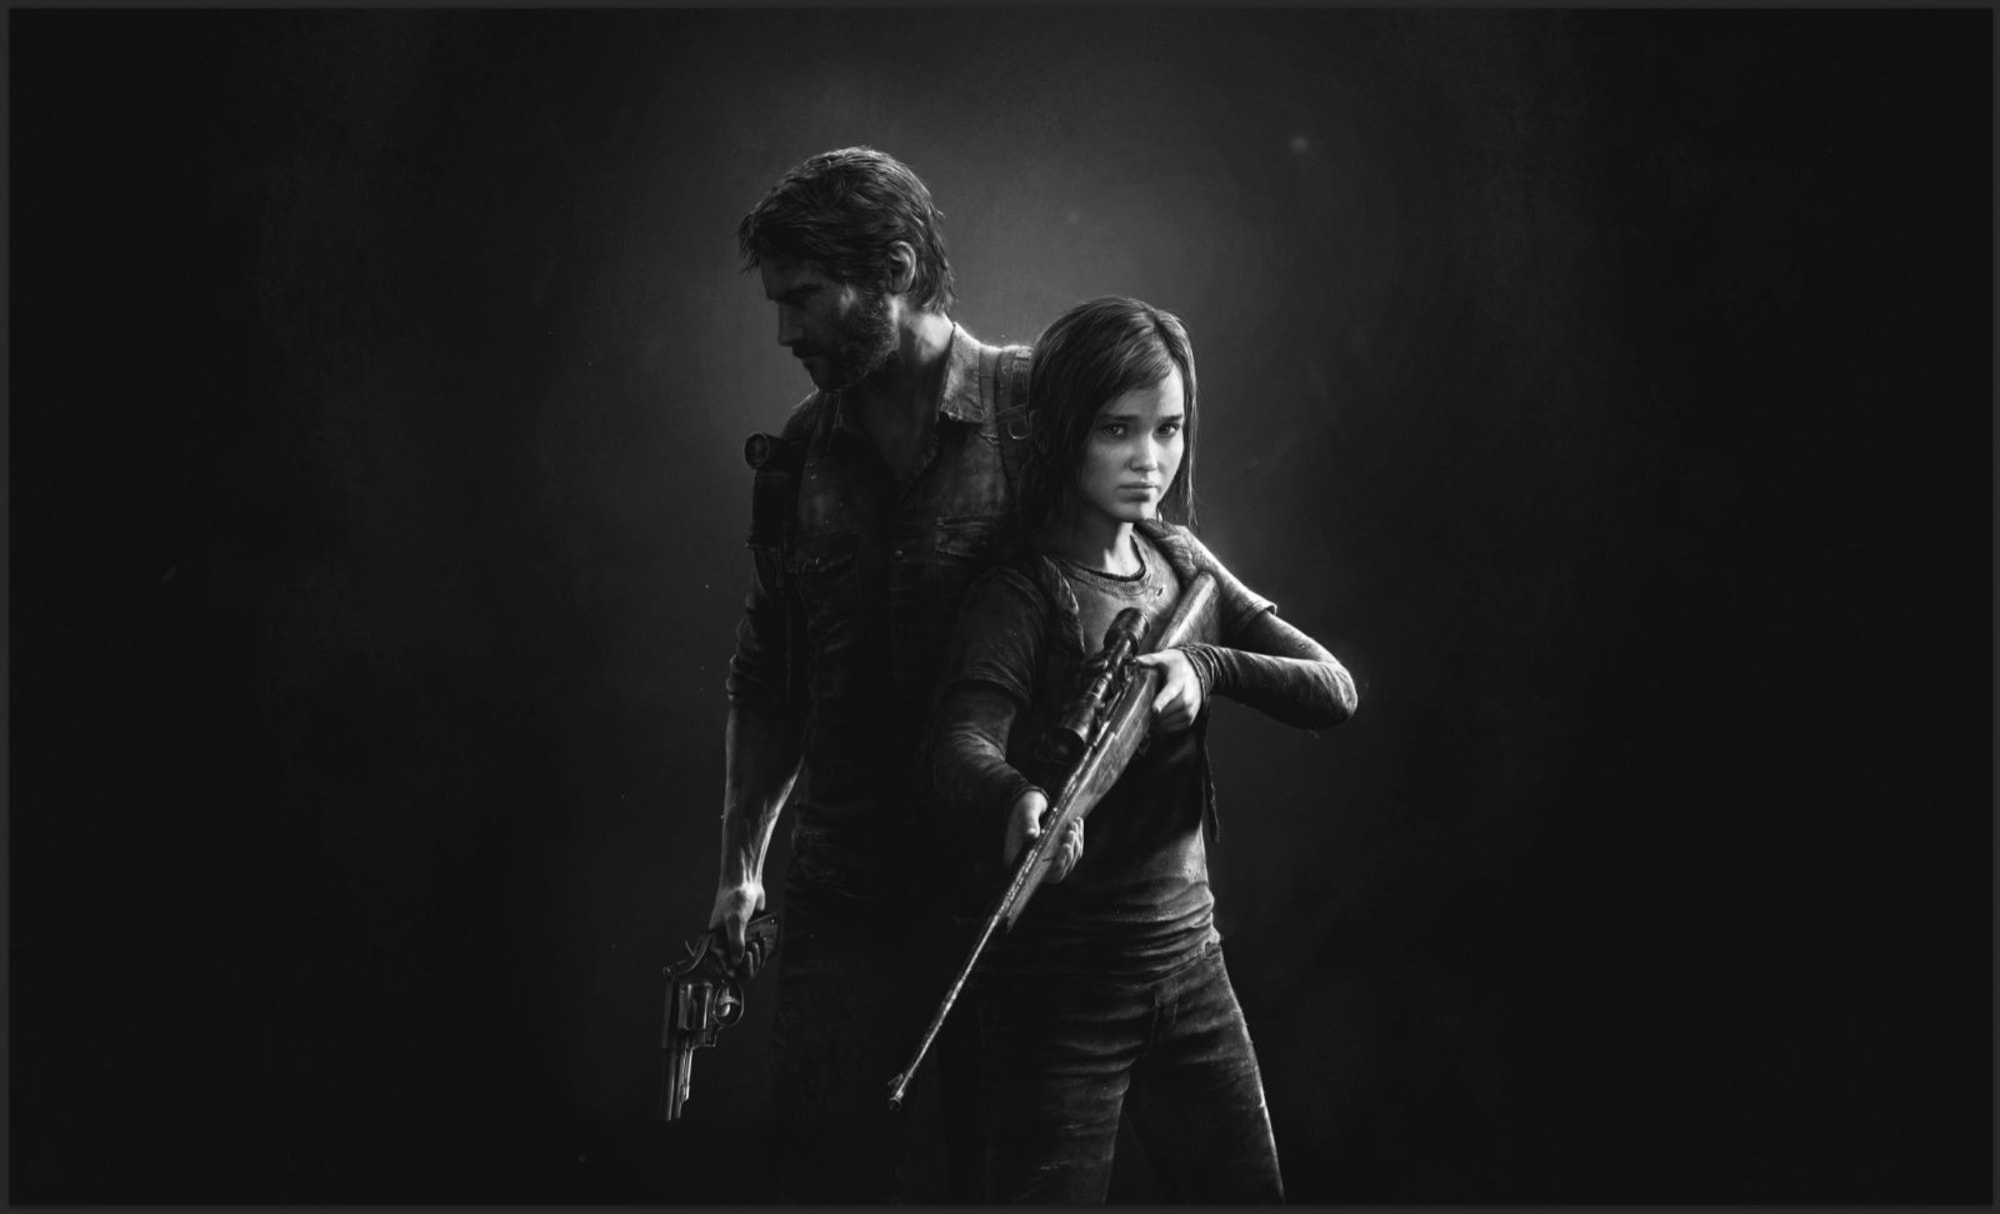 Revisiting The Last Of Us Game's Ending Before The Show Finale